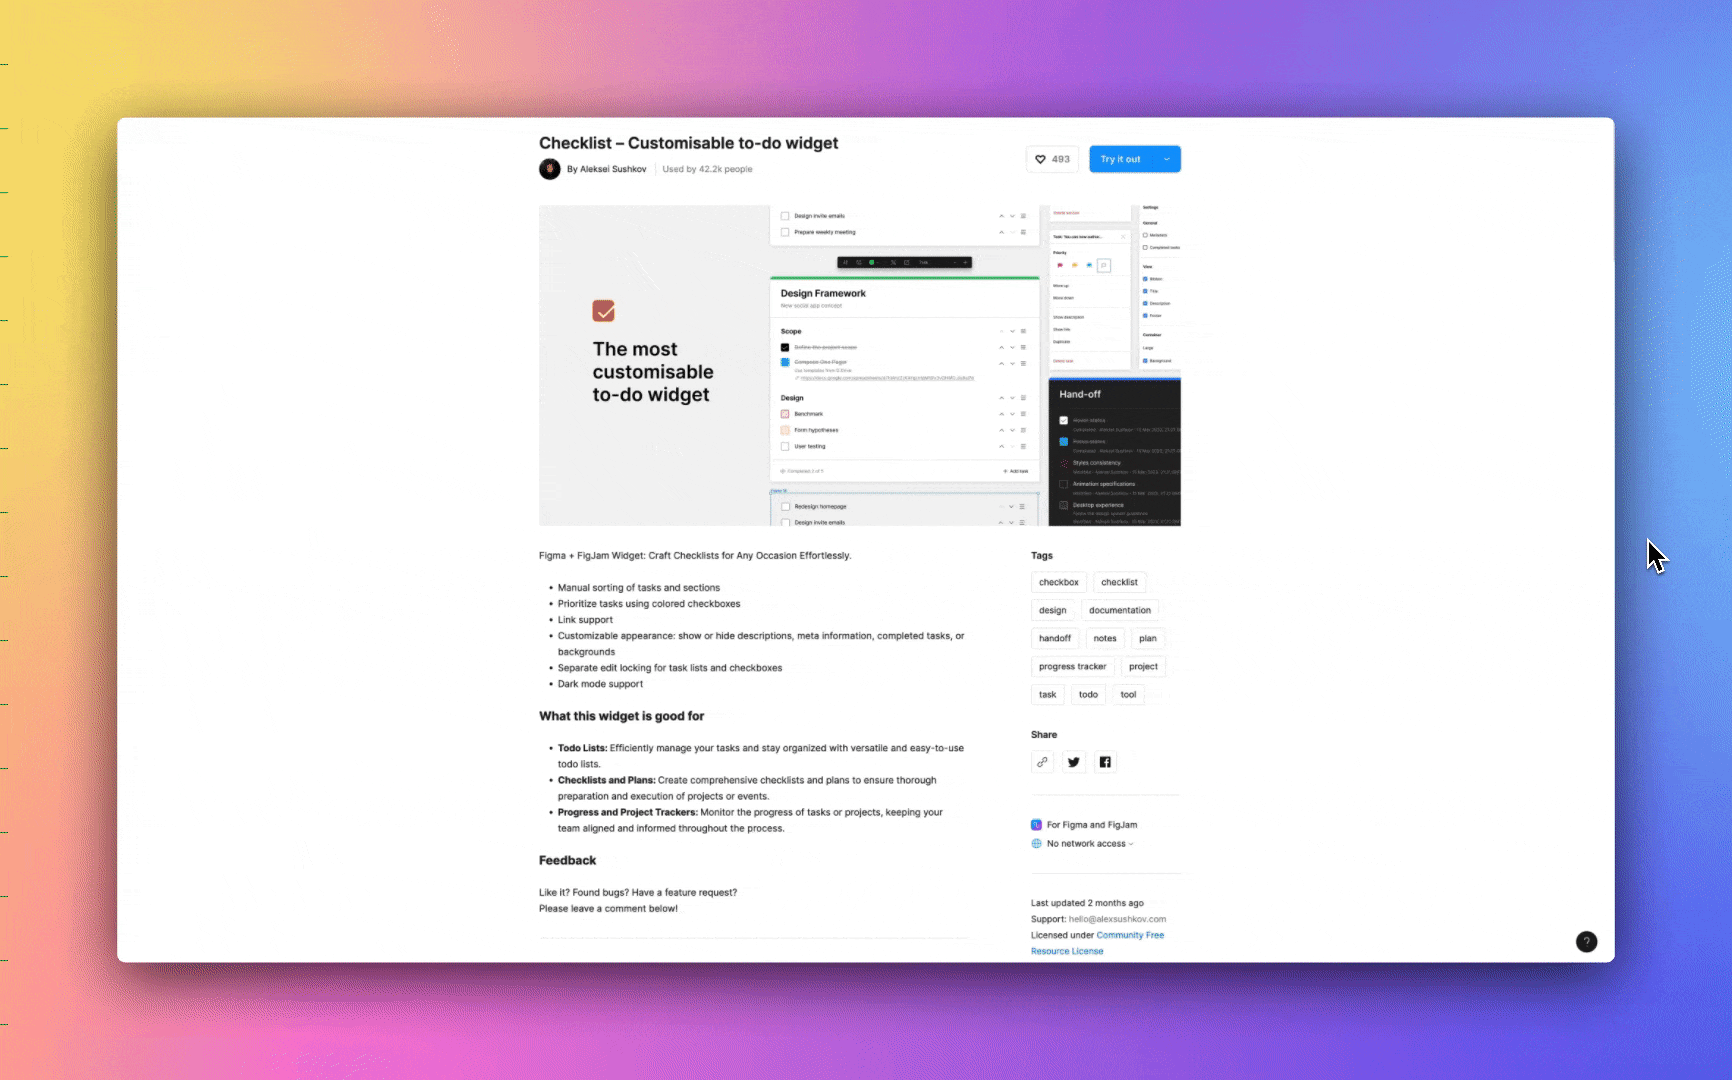 How To Add a Simple To-Do List or Checklist For Your Project Inside of Figma